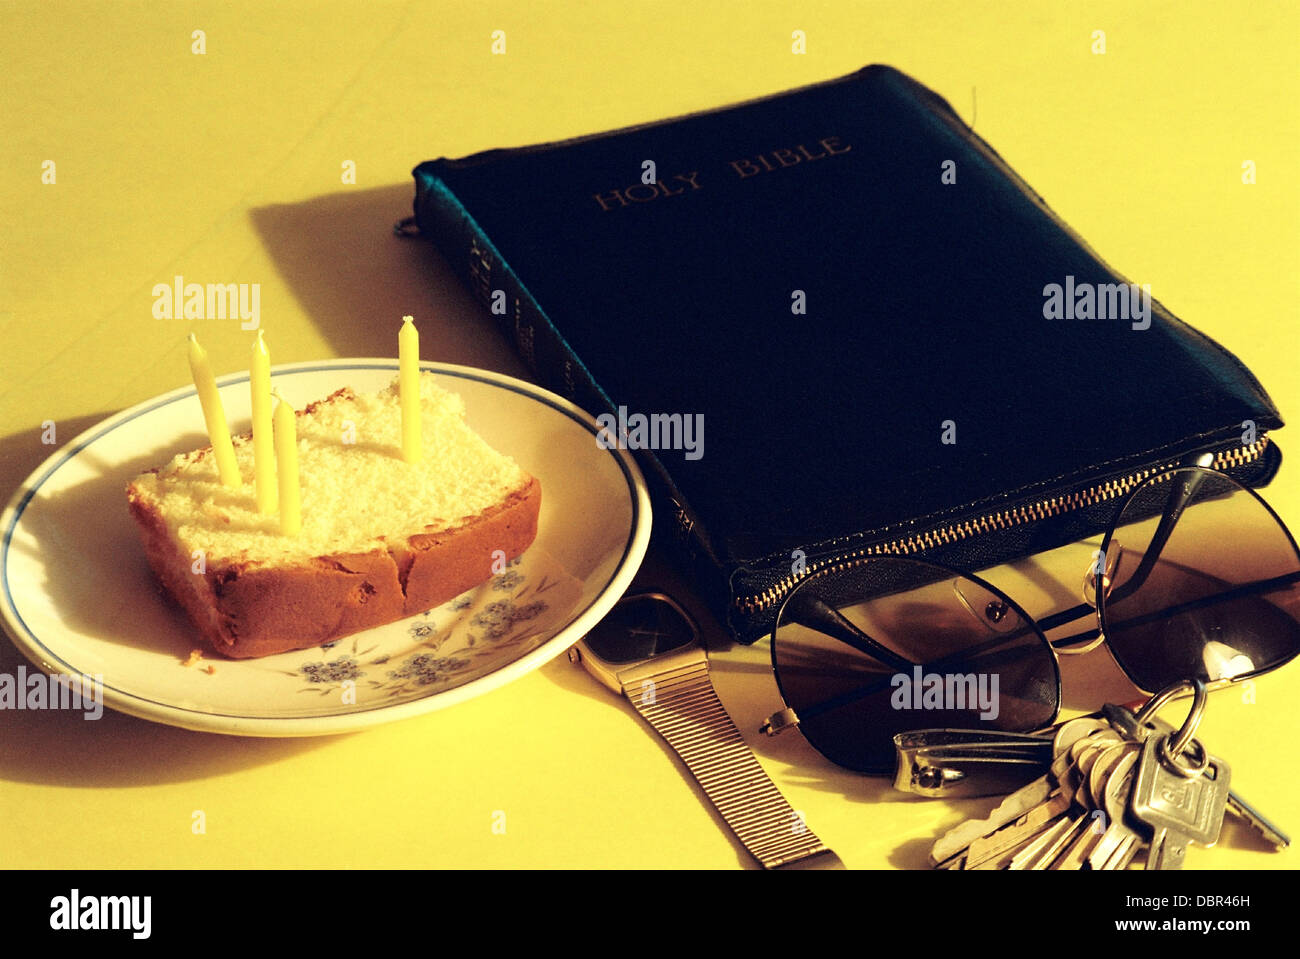 My birthday cake,at age thirty one,surrounded by essentials of life. Stock Photo